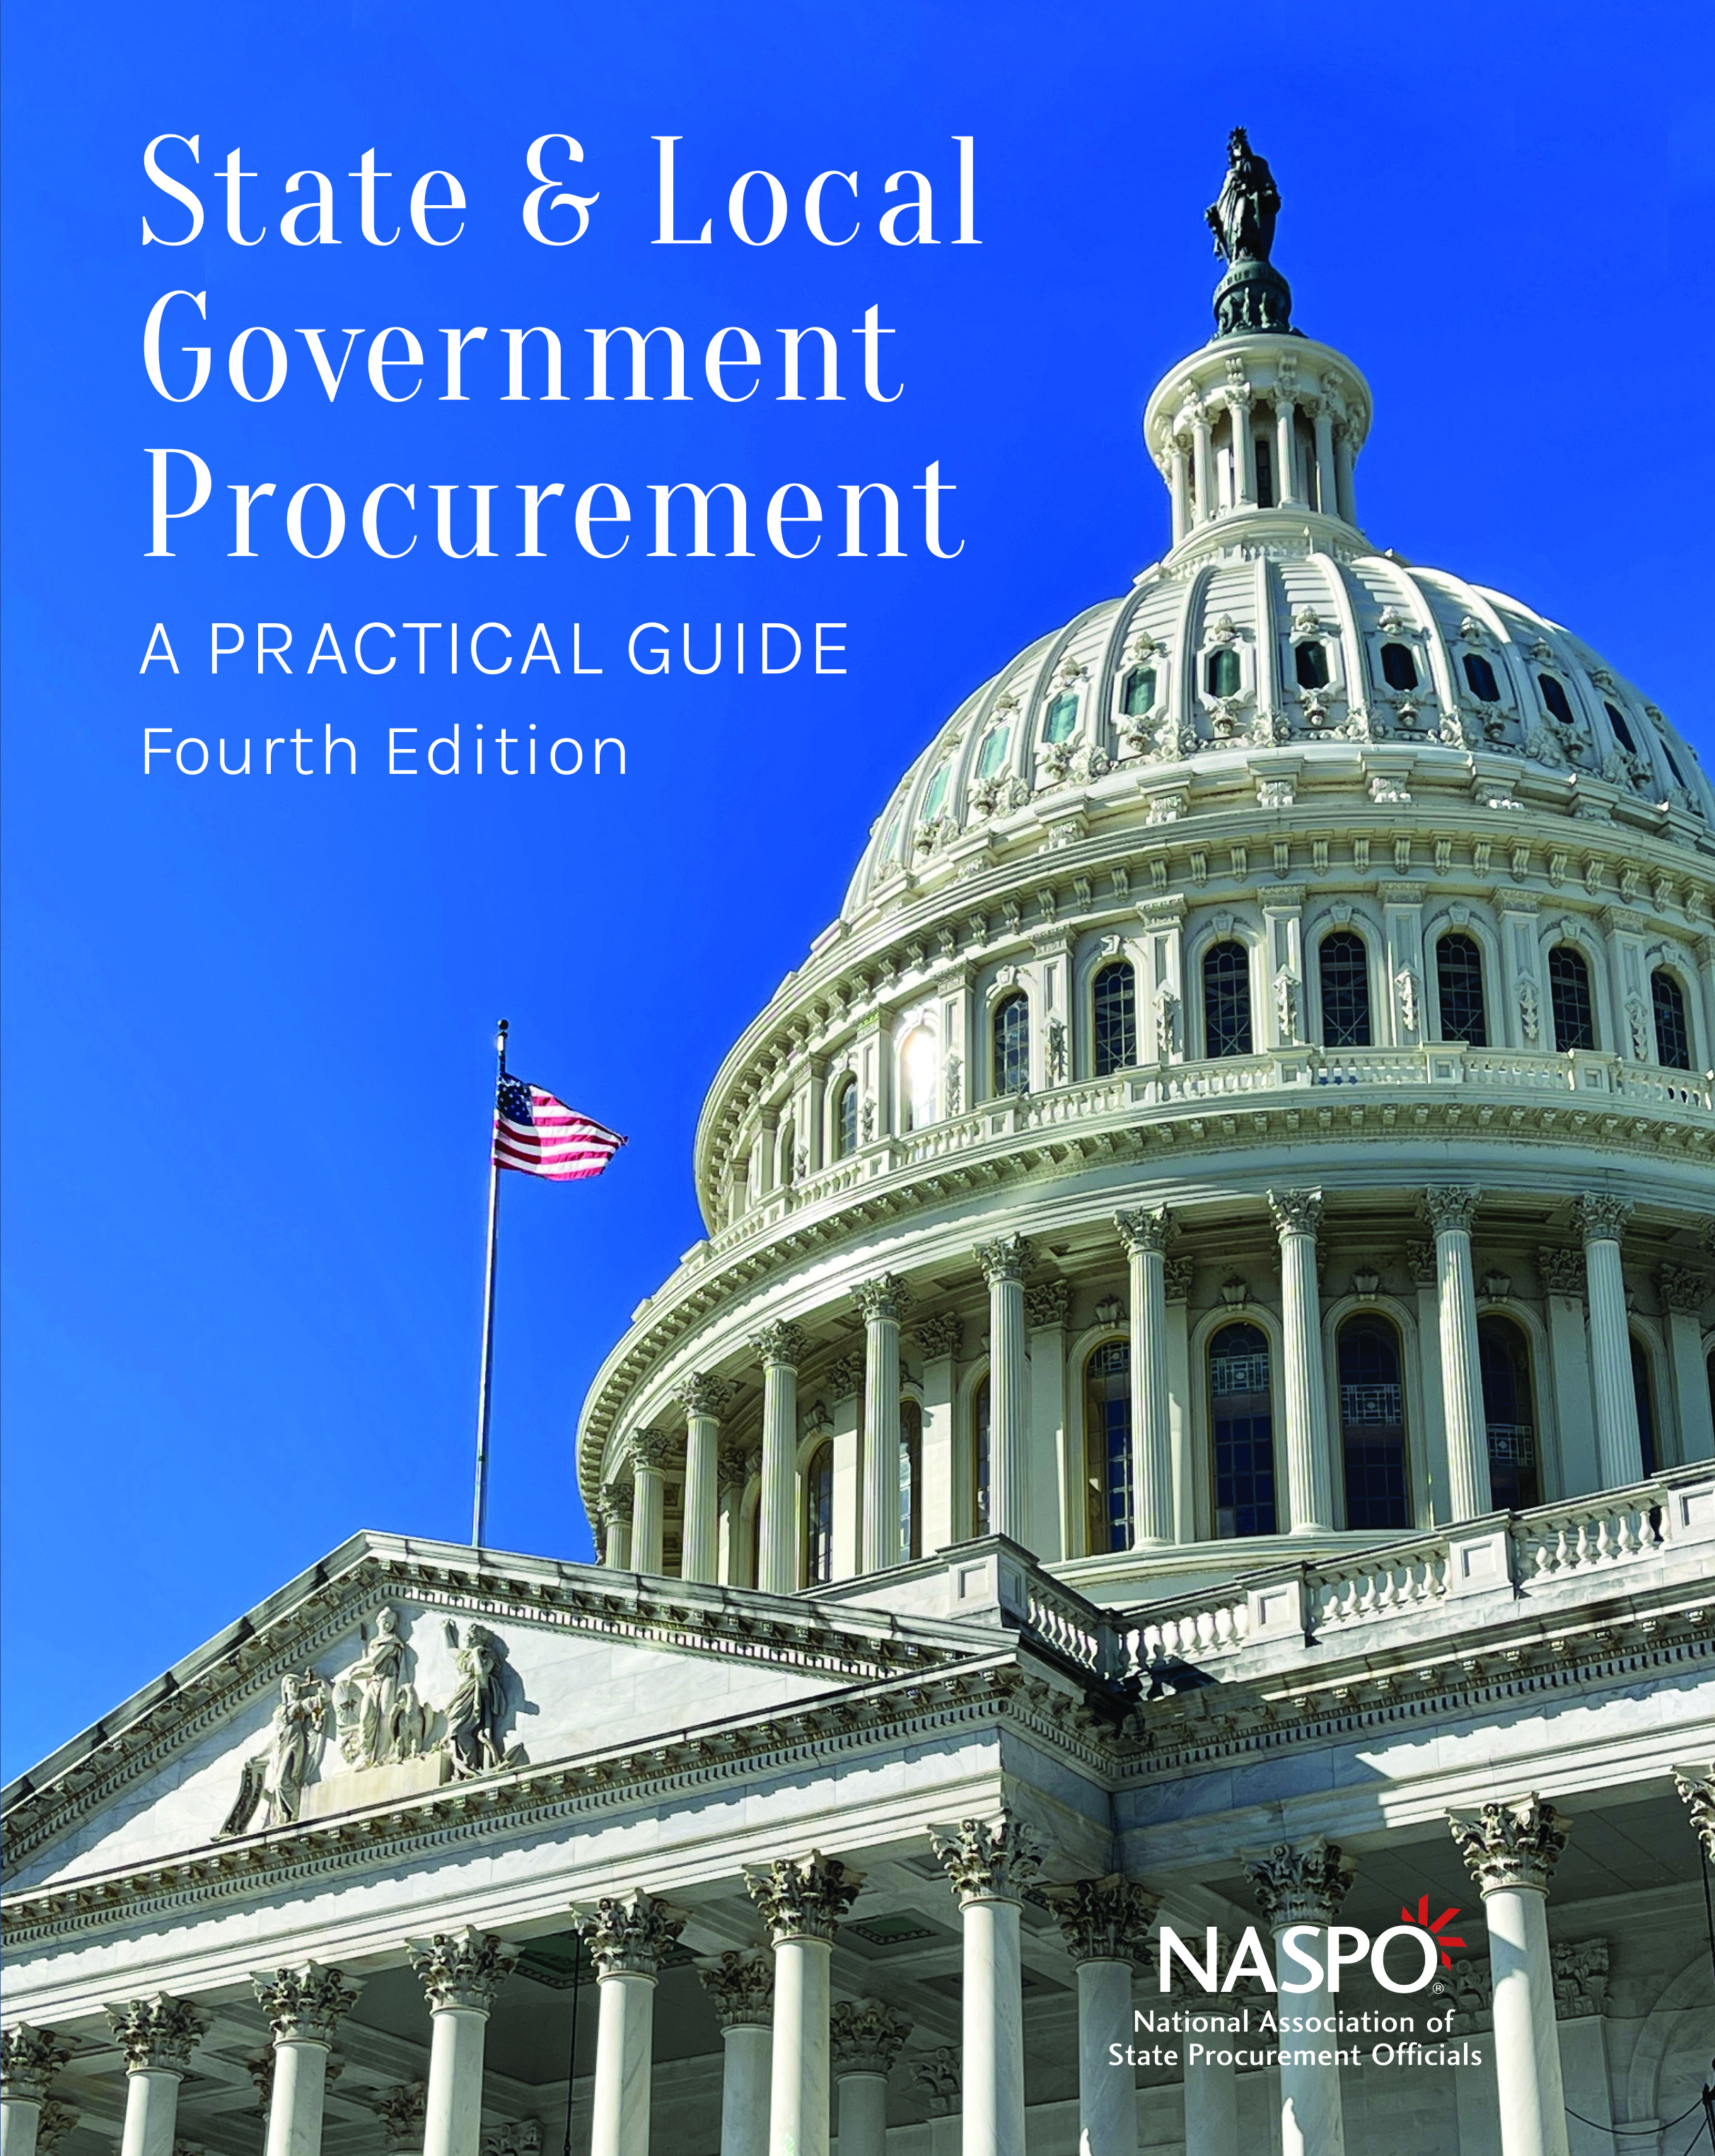 State & Local Government Procurement: A Practical Guide Fourth Edition